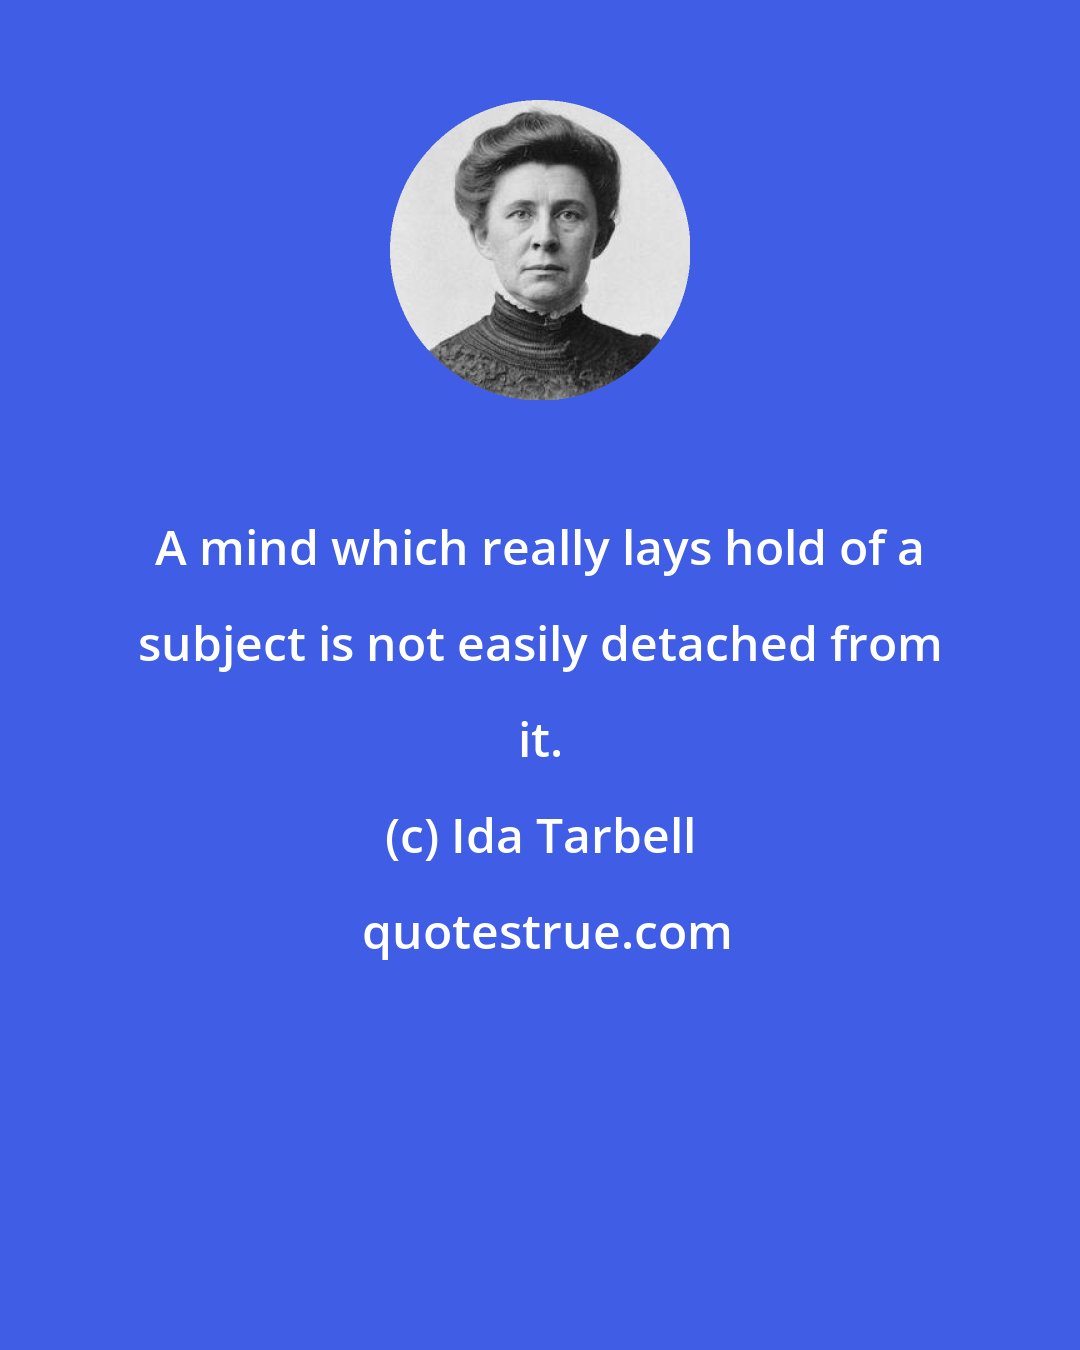 Ida Tarbell: A mind which really lays hold of a subject is not easily detached from it.